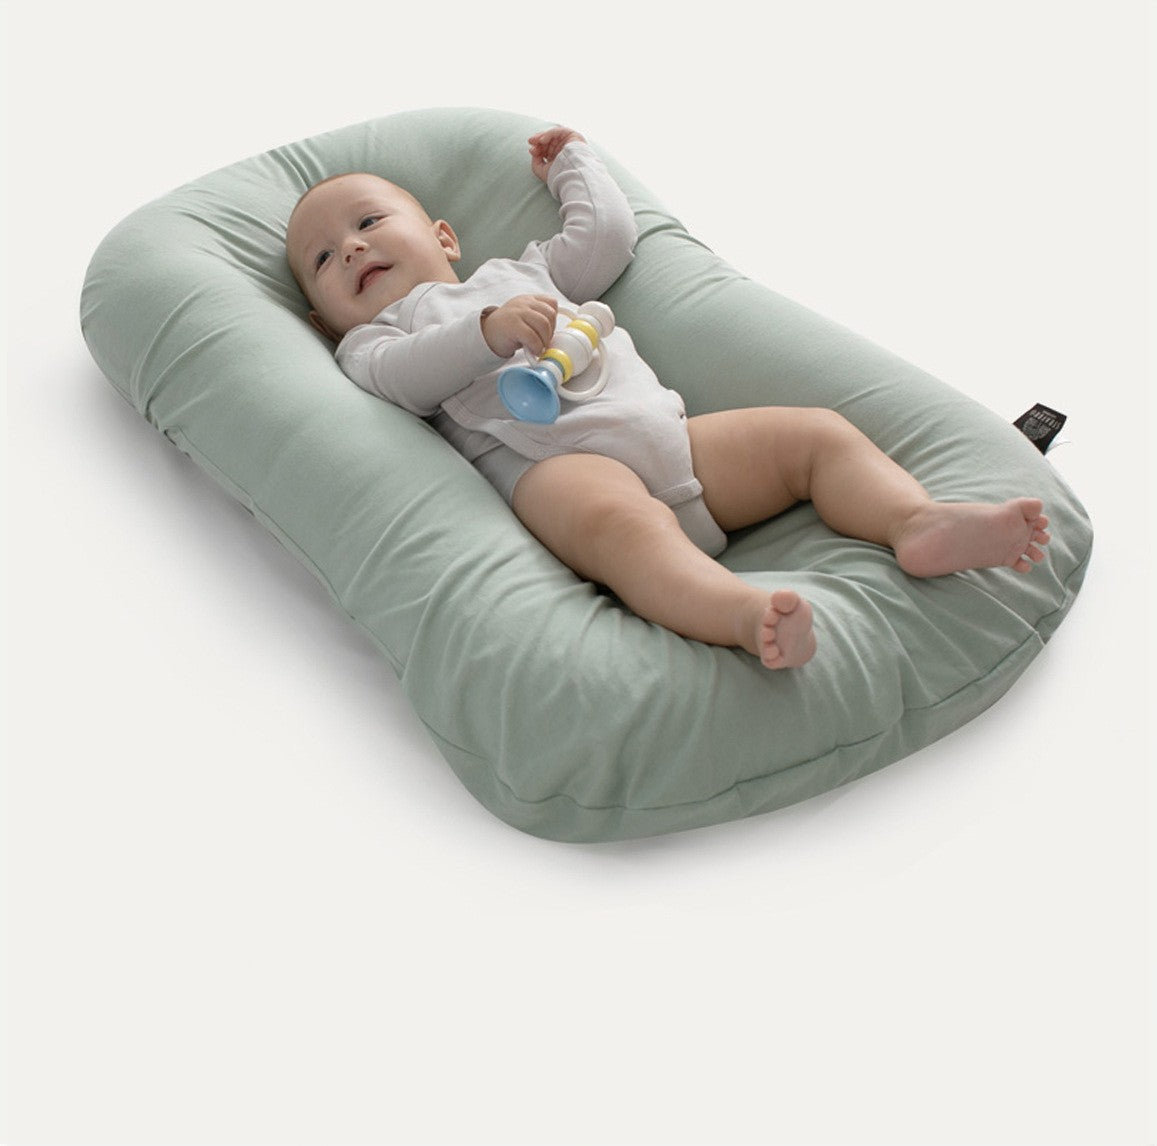 Newborn Baby Comfort Portable Movable Bionic Bed